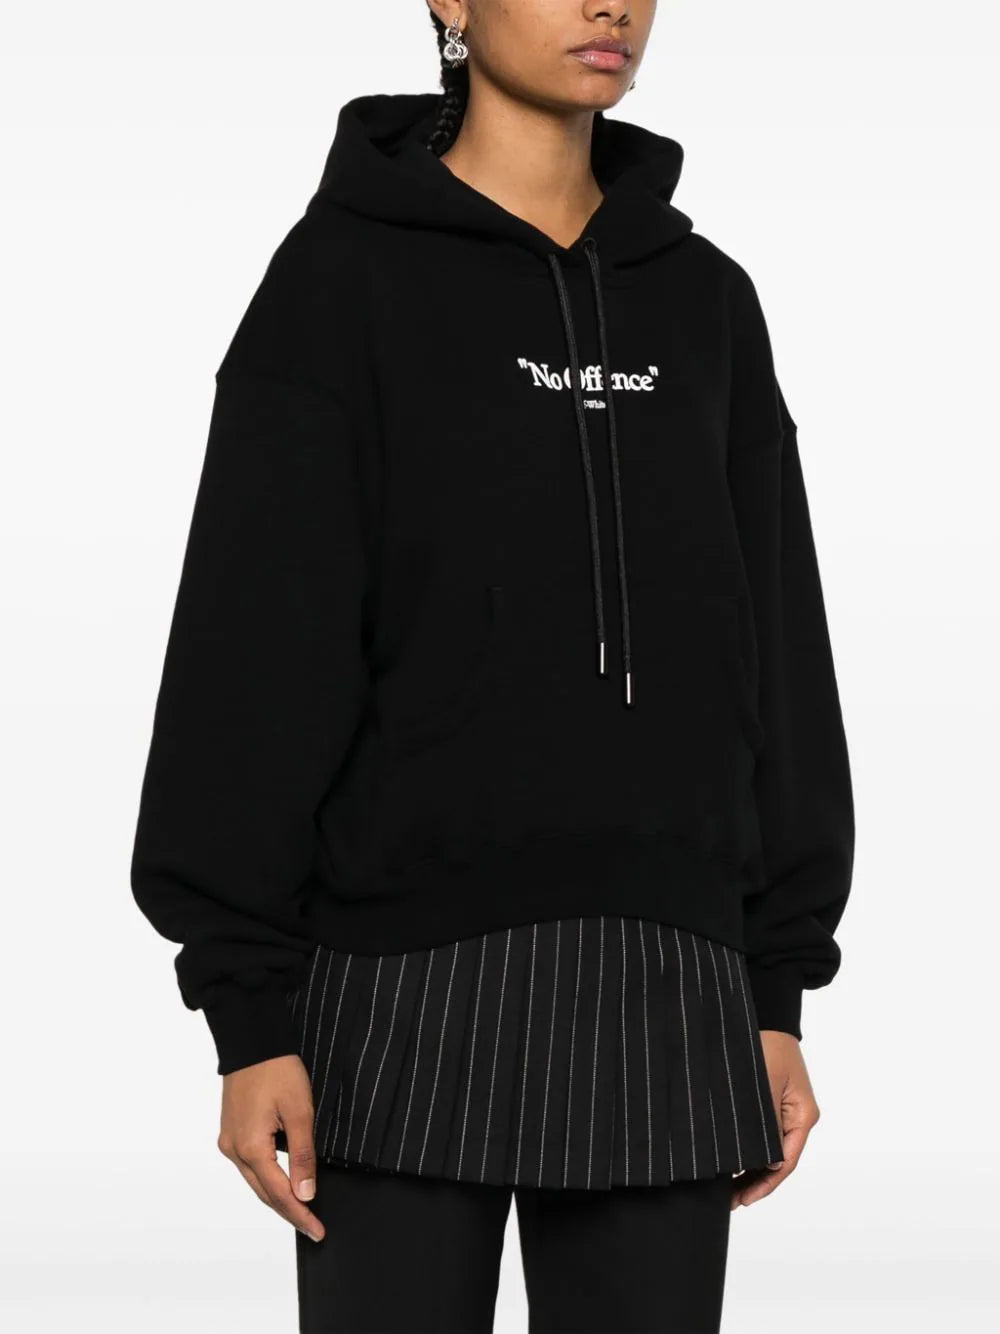 No Offence cotton hoodie